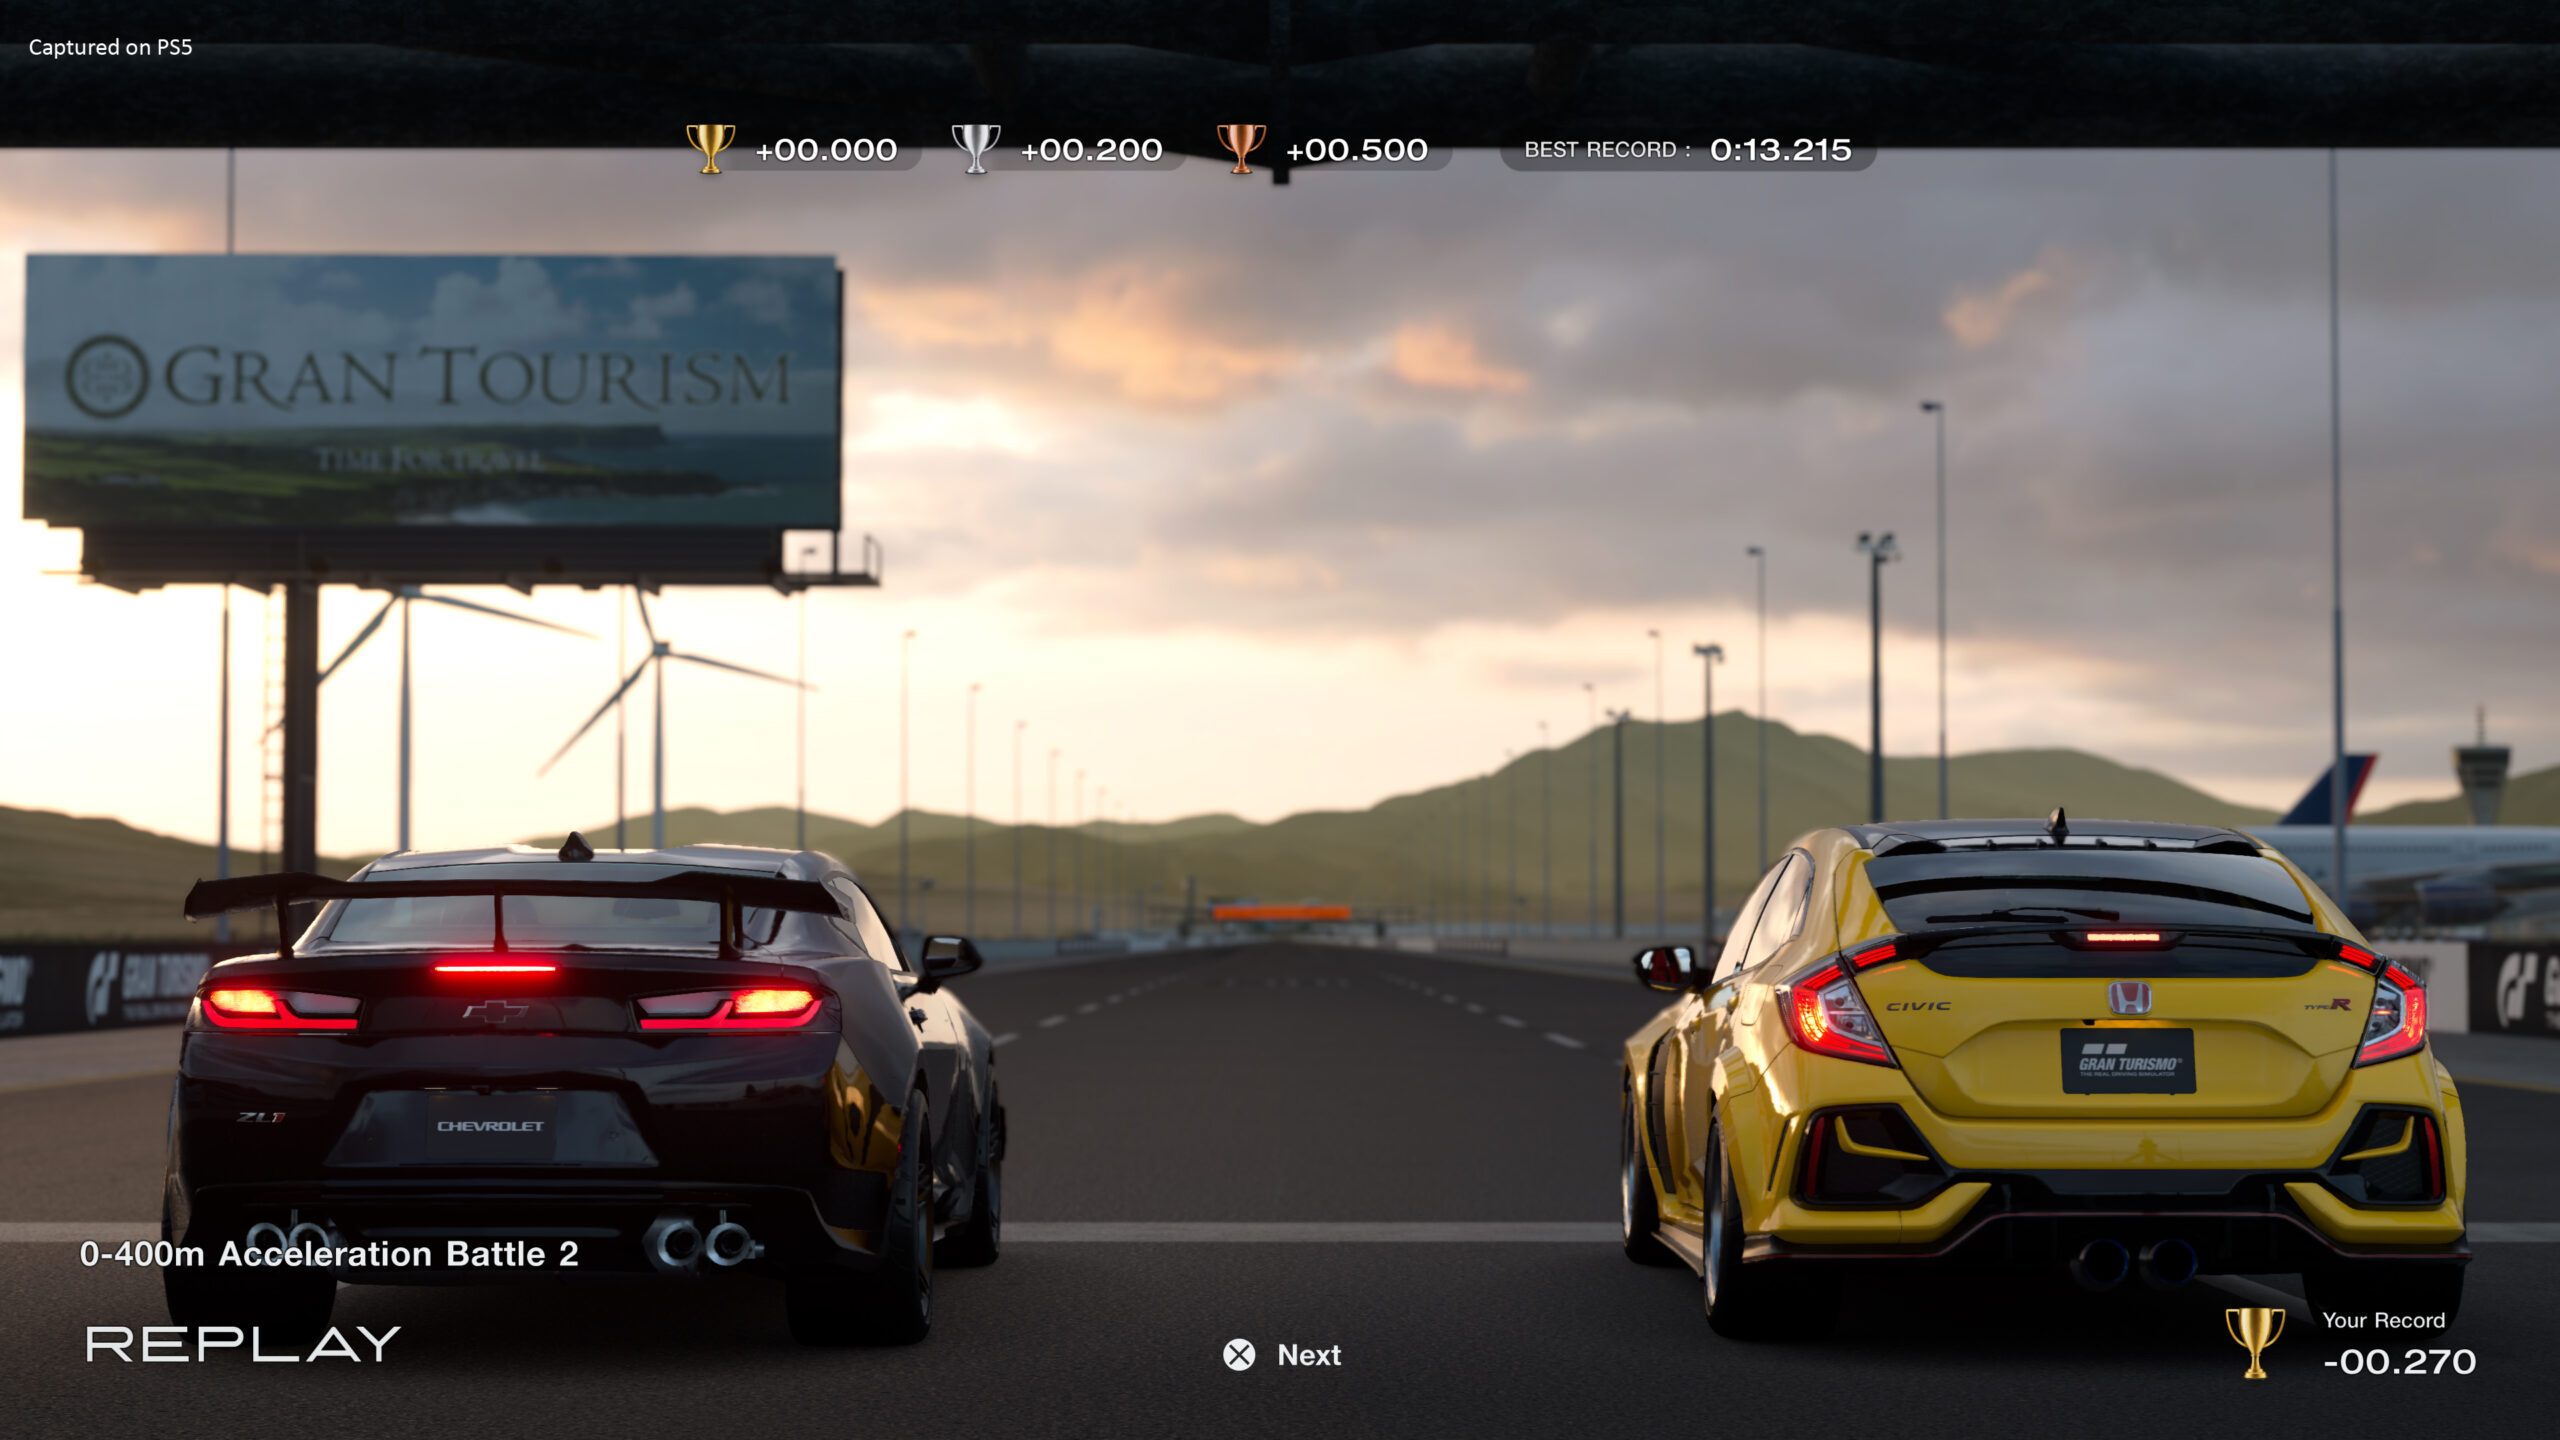 GT7 PS4 & PS5 Editions Detailed : r/granturismo